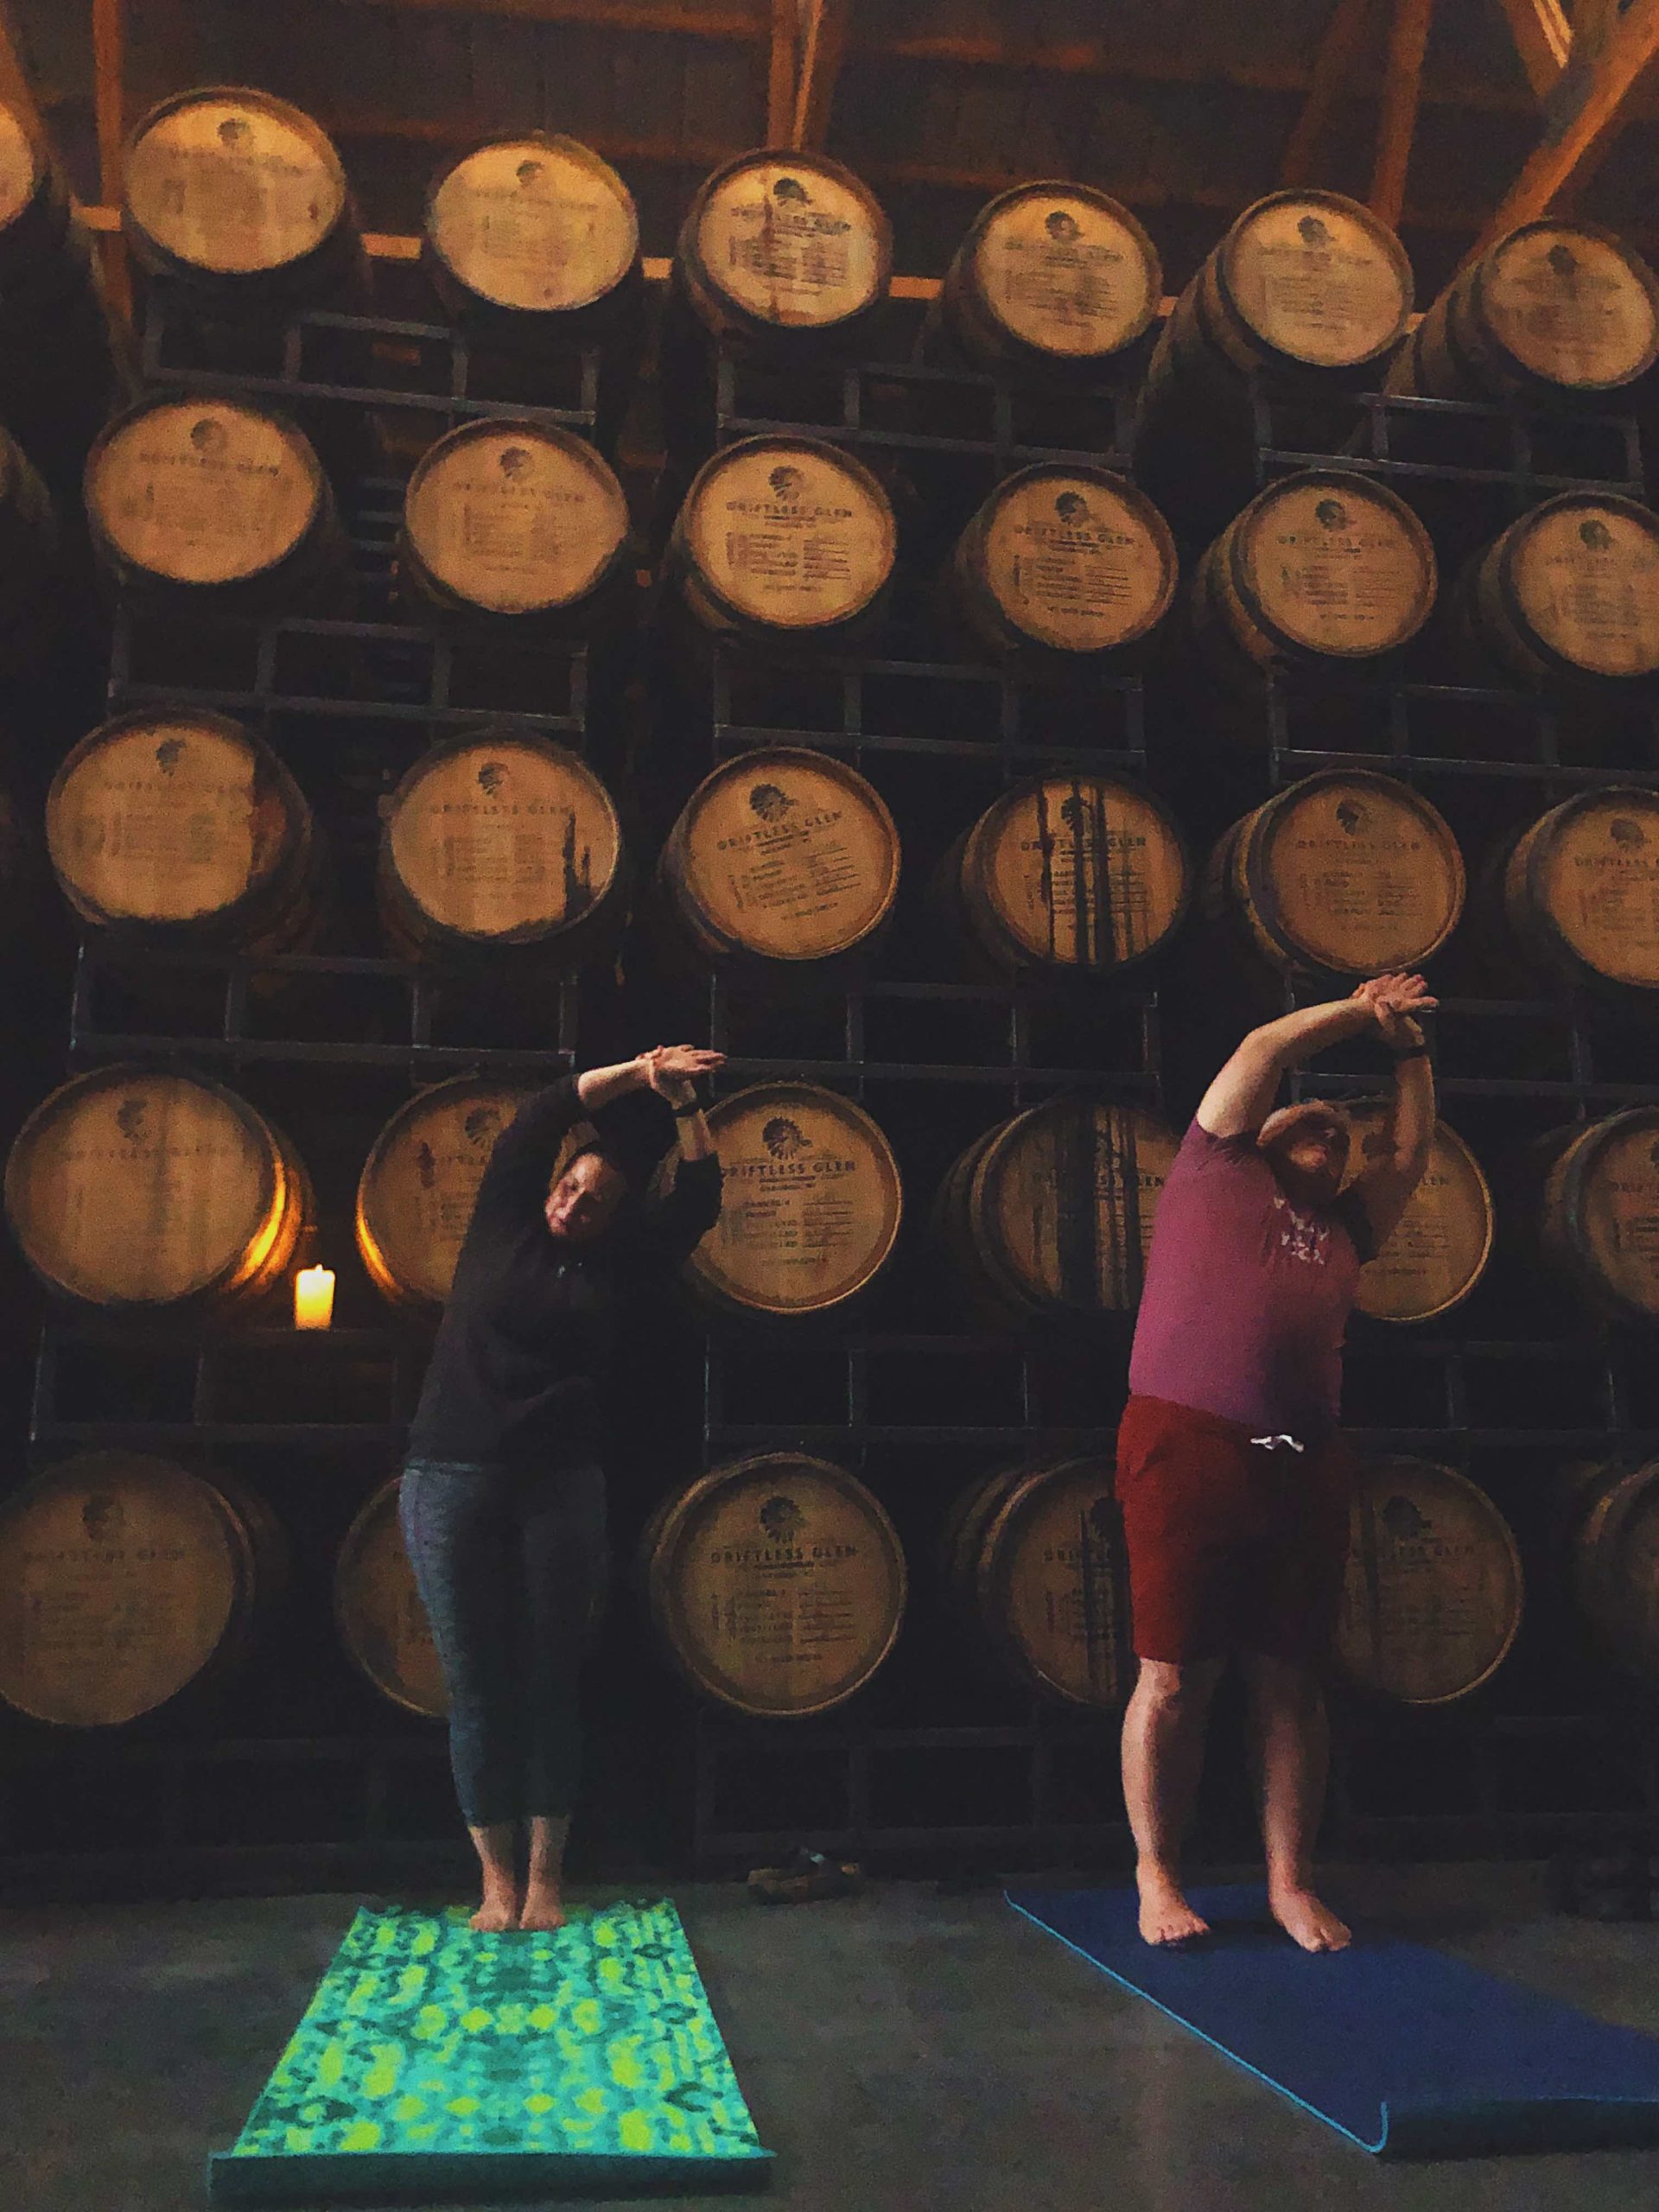 Yoga & Whiskey participants stretch and relax during in the rackhouse, surrounded by barrels of whiskey